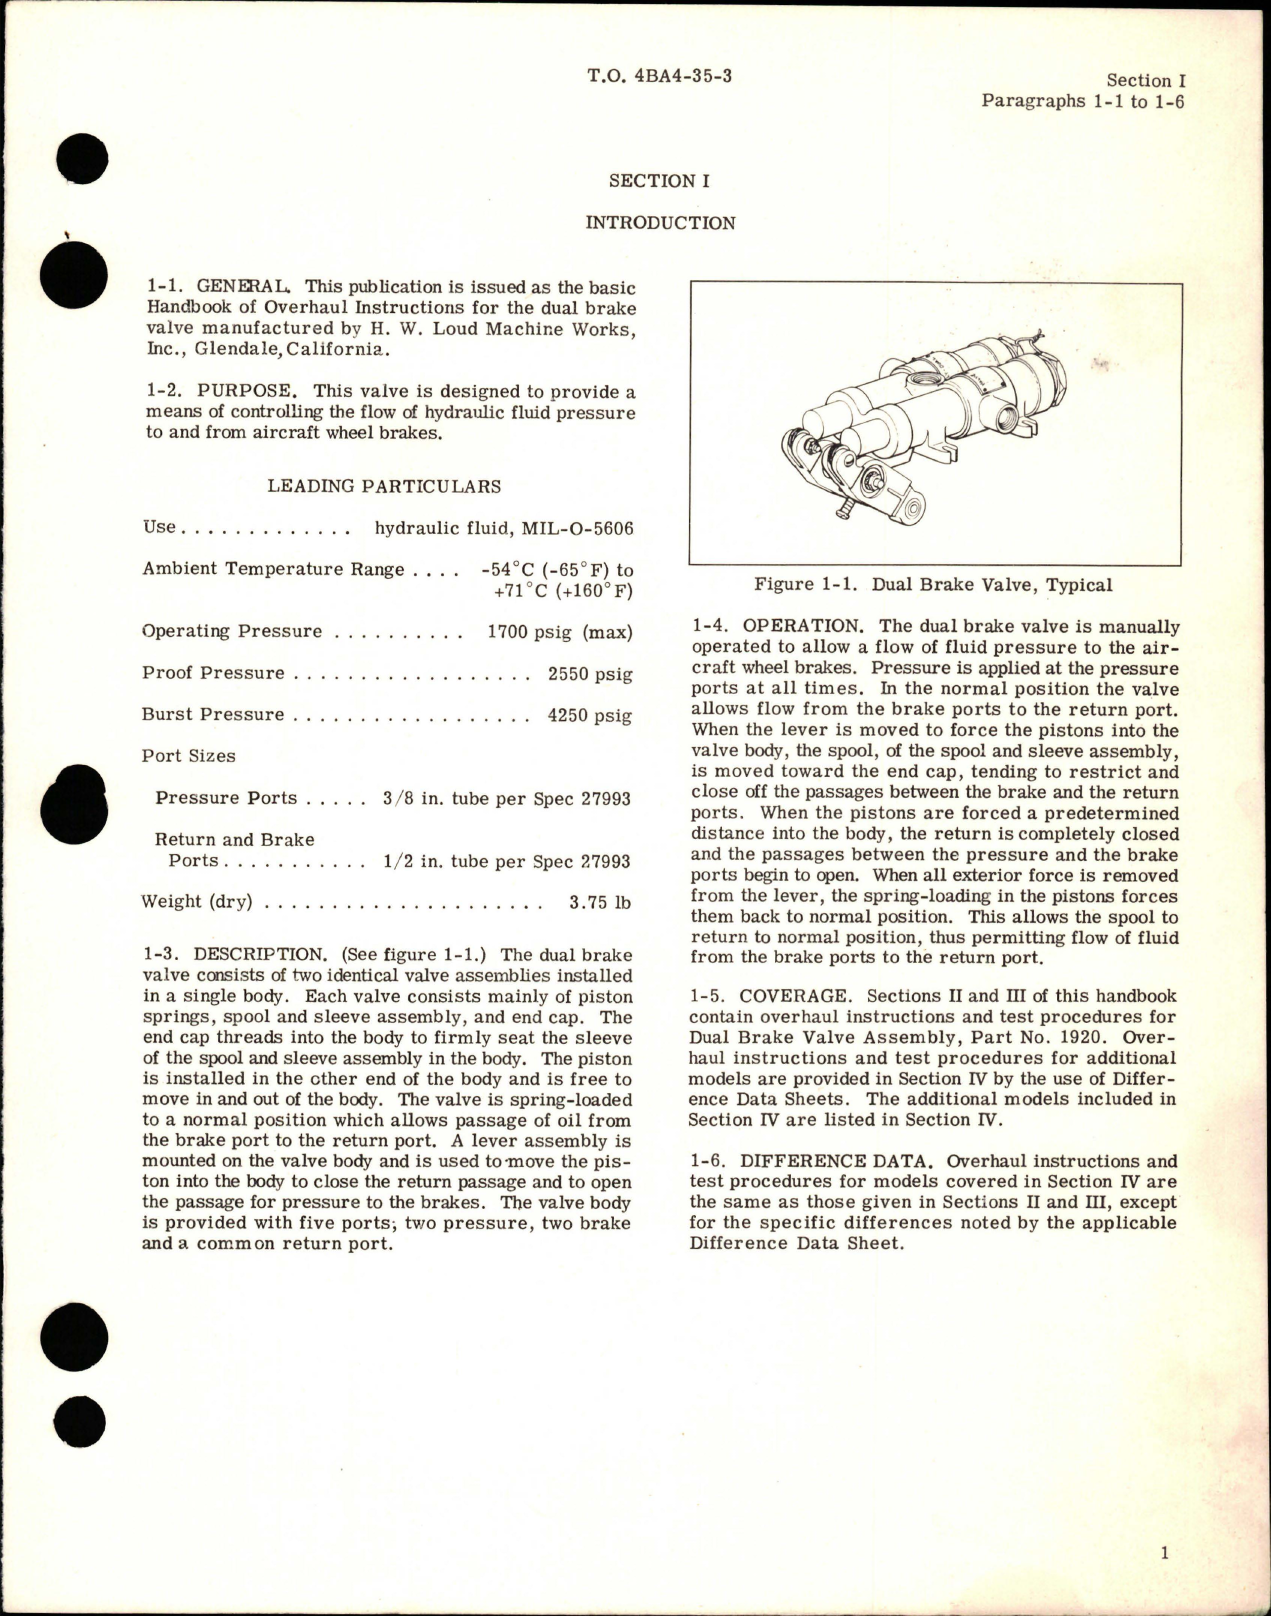 Sample page 5 from AirCorps Library document: Overhaul Instructions for Dual Brake Valves - Parts 1920, 1920-3, 5140, and 5142 